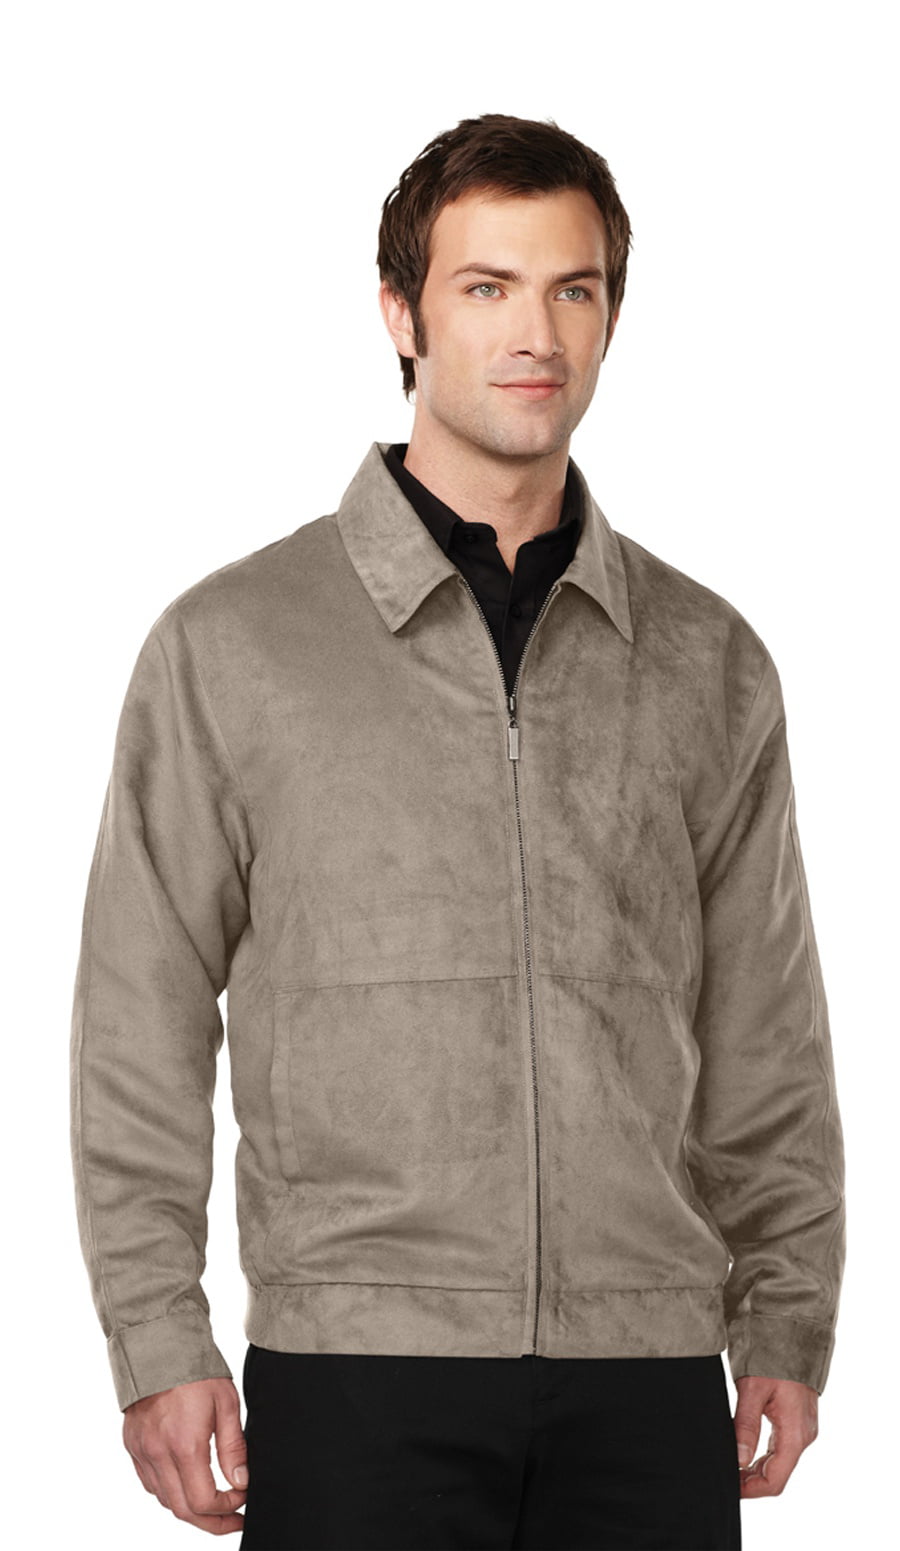 Tri-Mountain Gold Conrad J2930 Suede Jacket, X-Large, Light Taupe ...